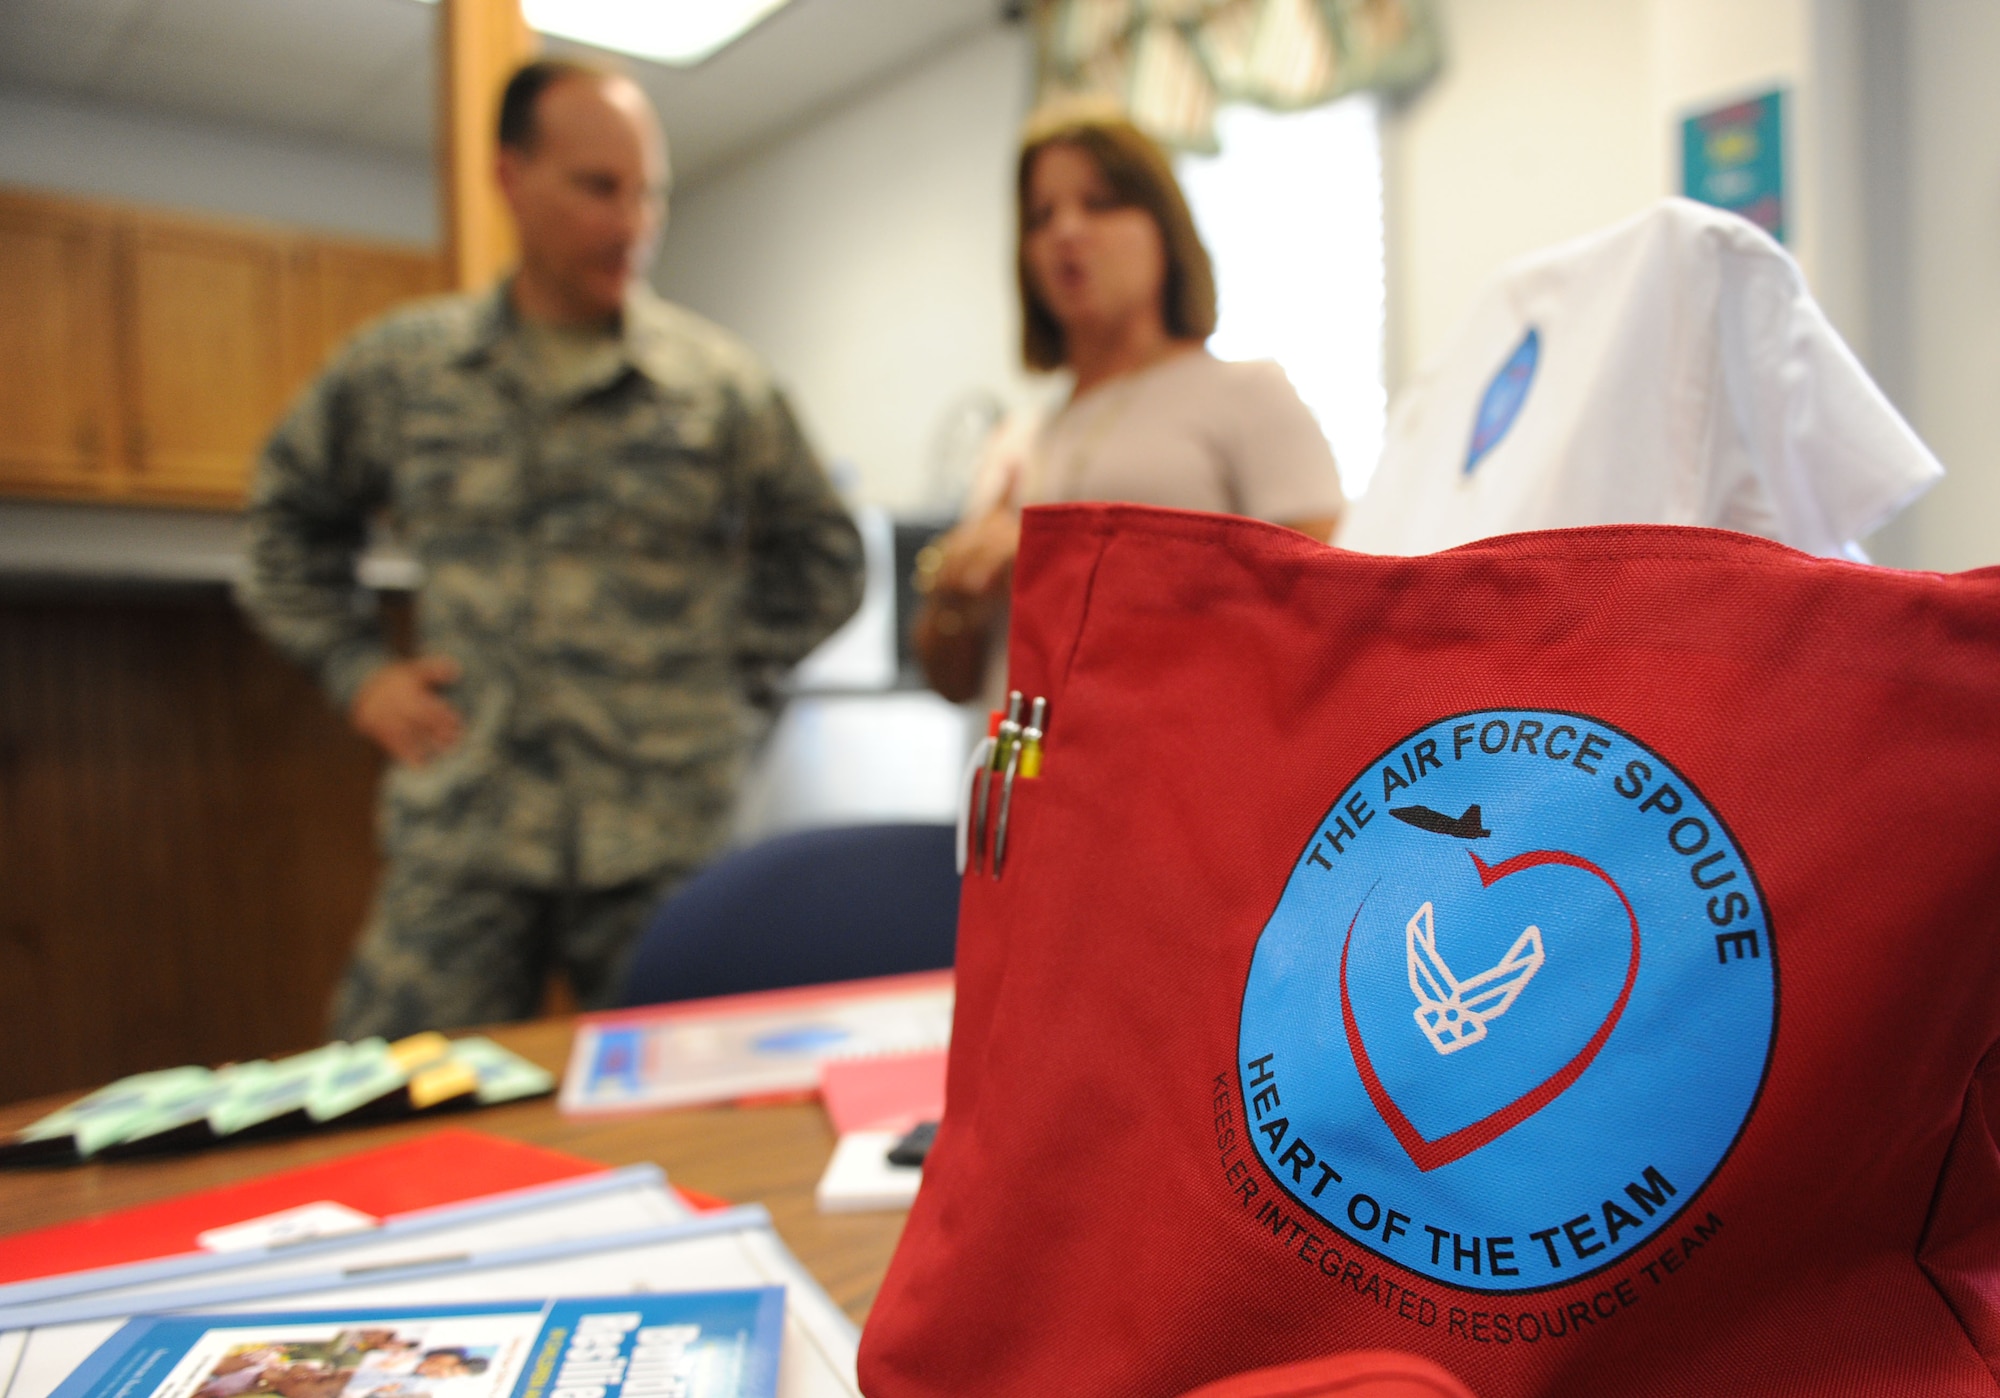 Col. Todd Weyerstrass, 2nd Air Force vice commander, receives a brief on Keesler’s key spouse program from Lisa Lyons, 81st Force Support Squadron community readiness specialist, at the Sablich Center during an 81st Training Wing orientation tour July 12, 2016, on Keesler Air Force Base, Miss. The purpose of the tour was to become familiar with the wing’s mission, operations and personnel. (U.S. Air Force photo by Kemberly Groue/Released)